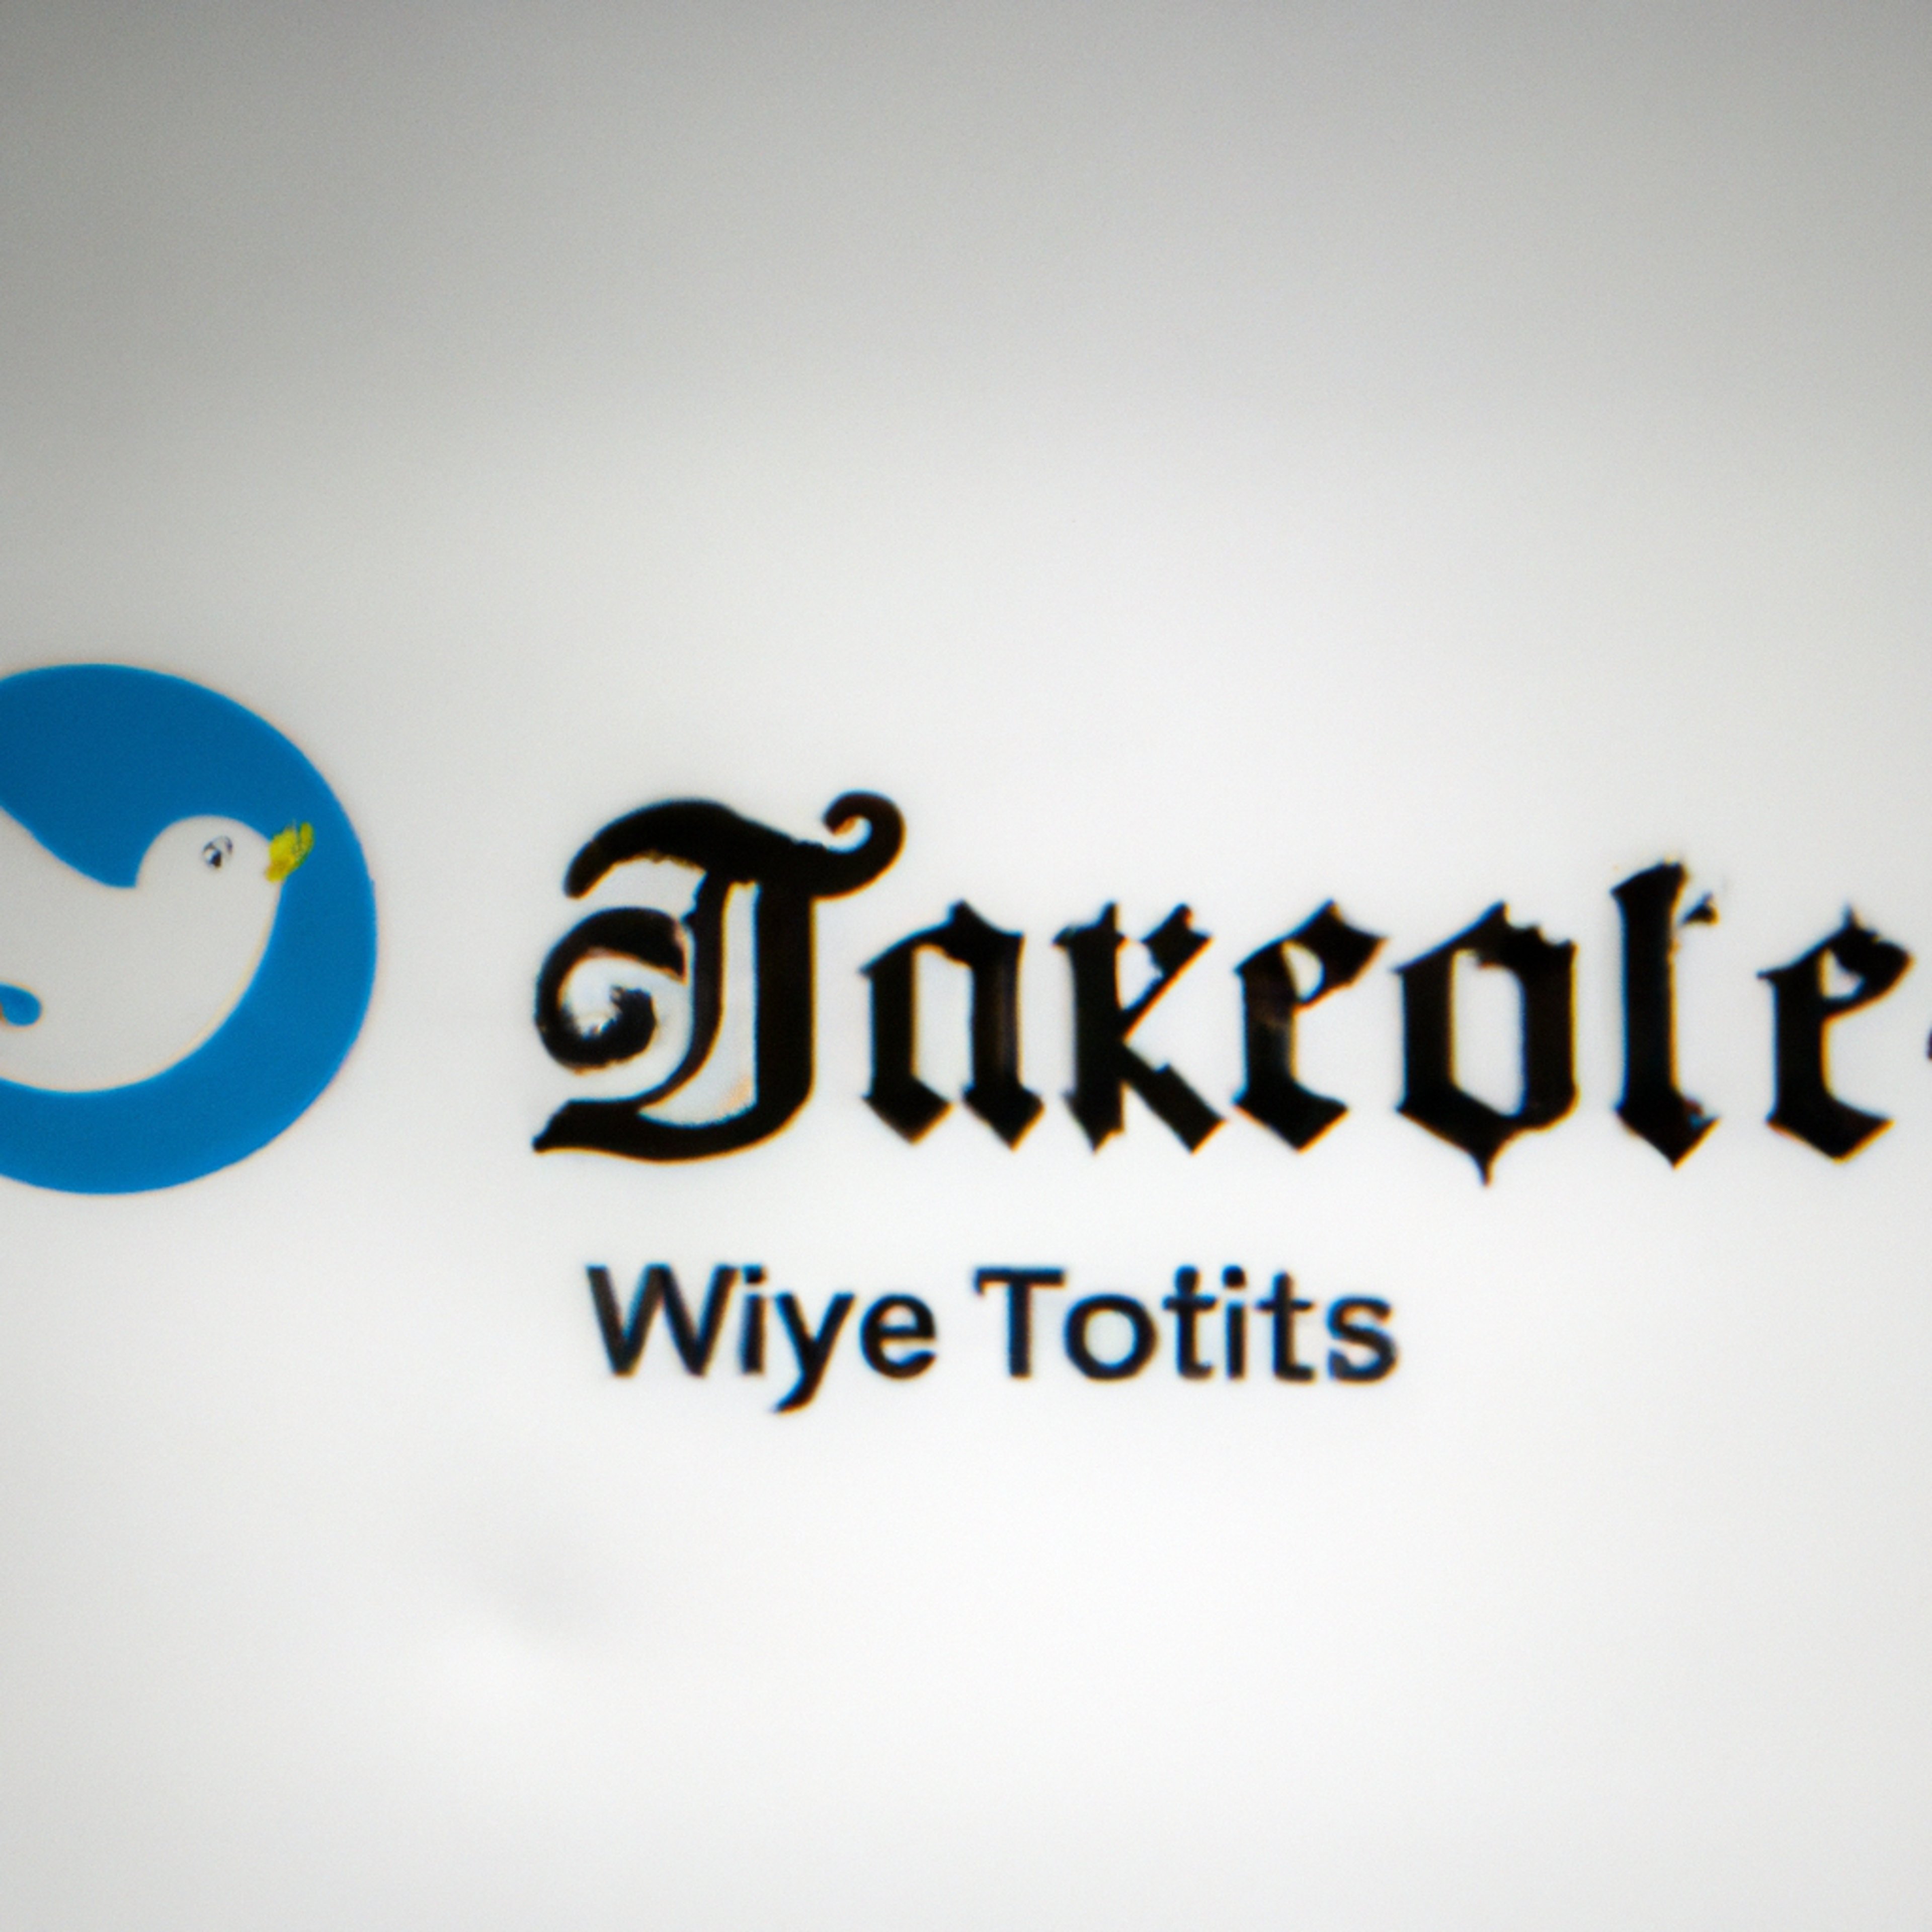 New York Times loses Twitter verification badge after refusing to pay for subscription service